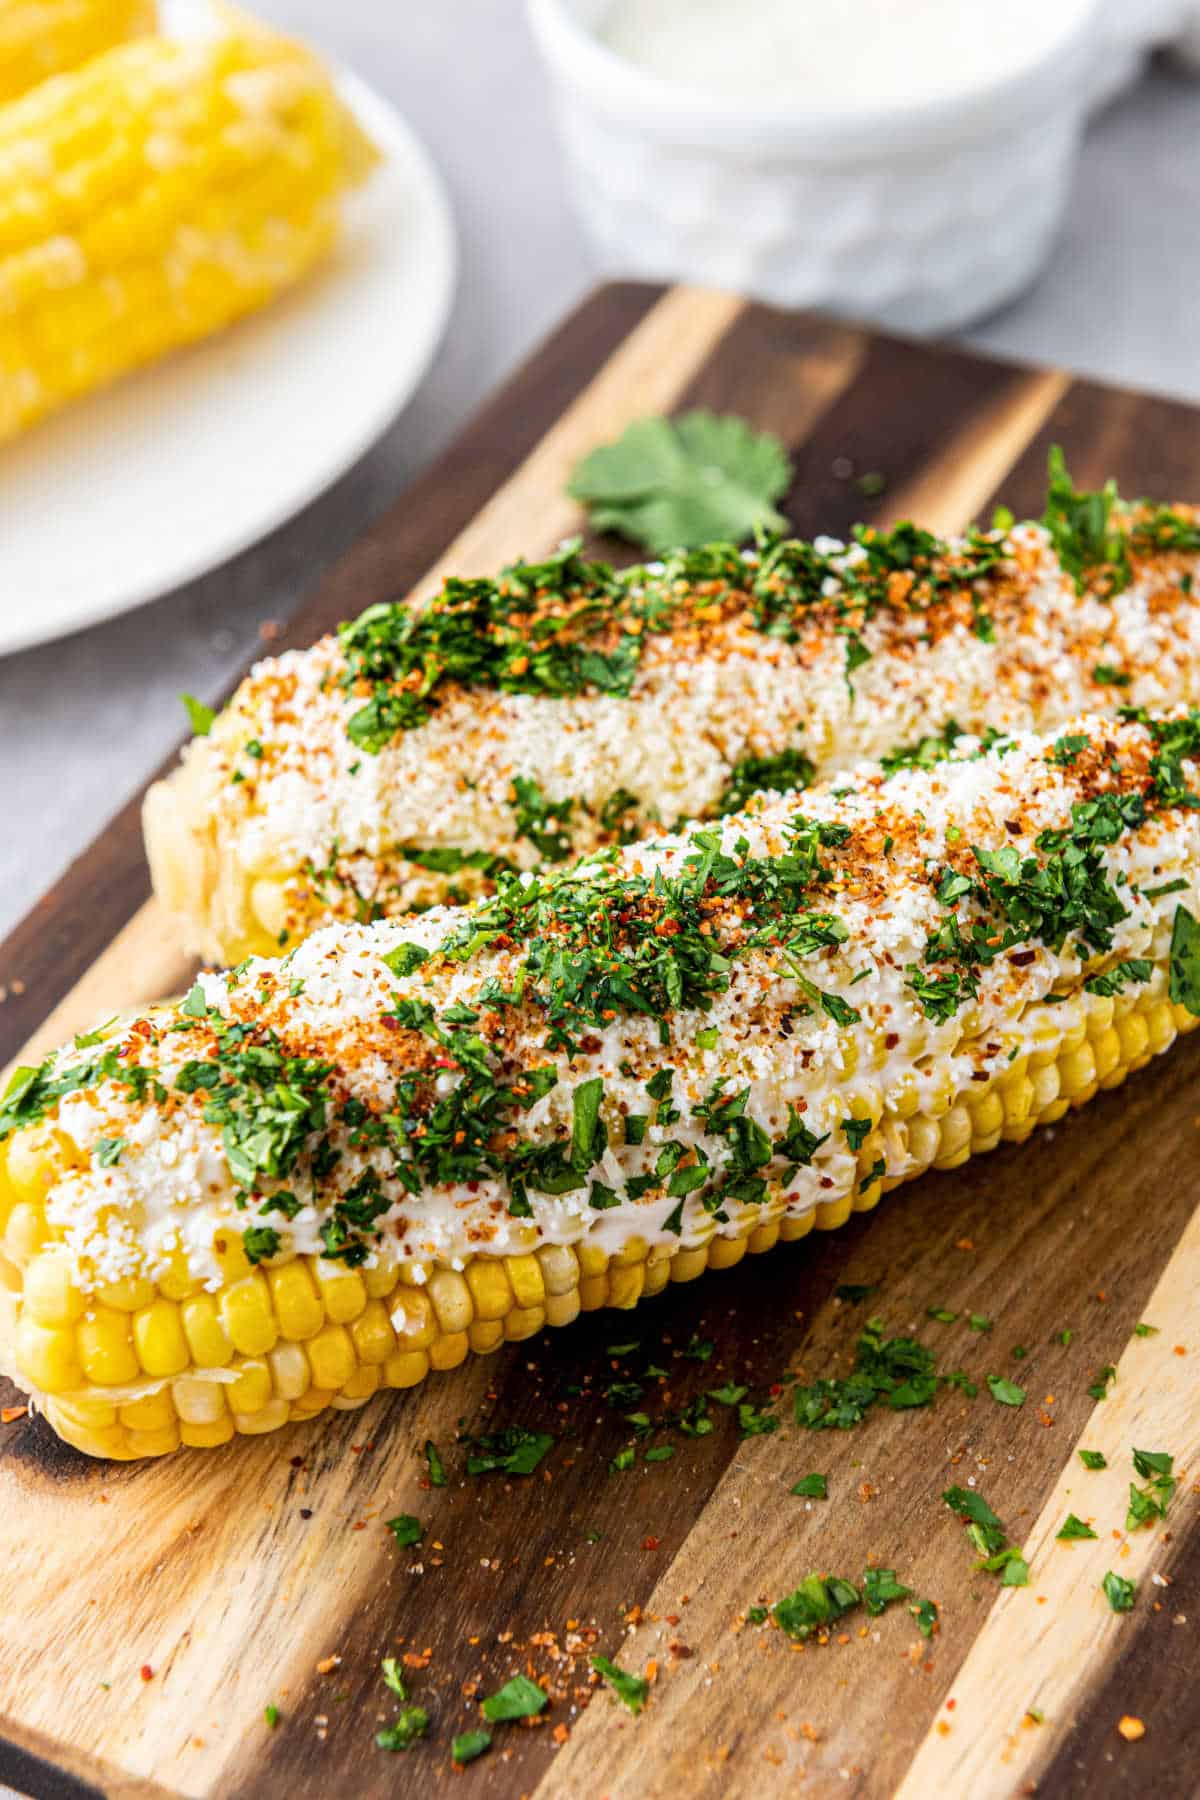 Two pieces of Elotes or Mexican Street Corn, on a wooden baord.